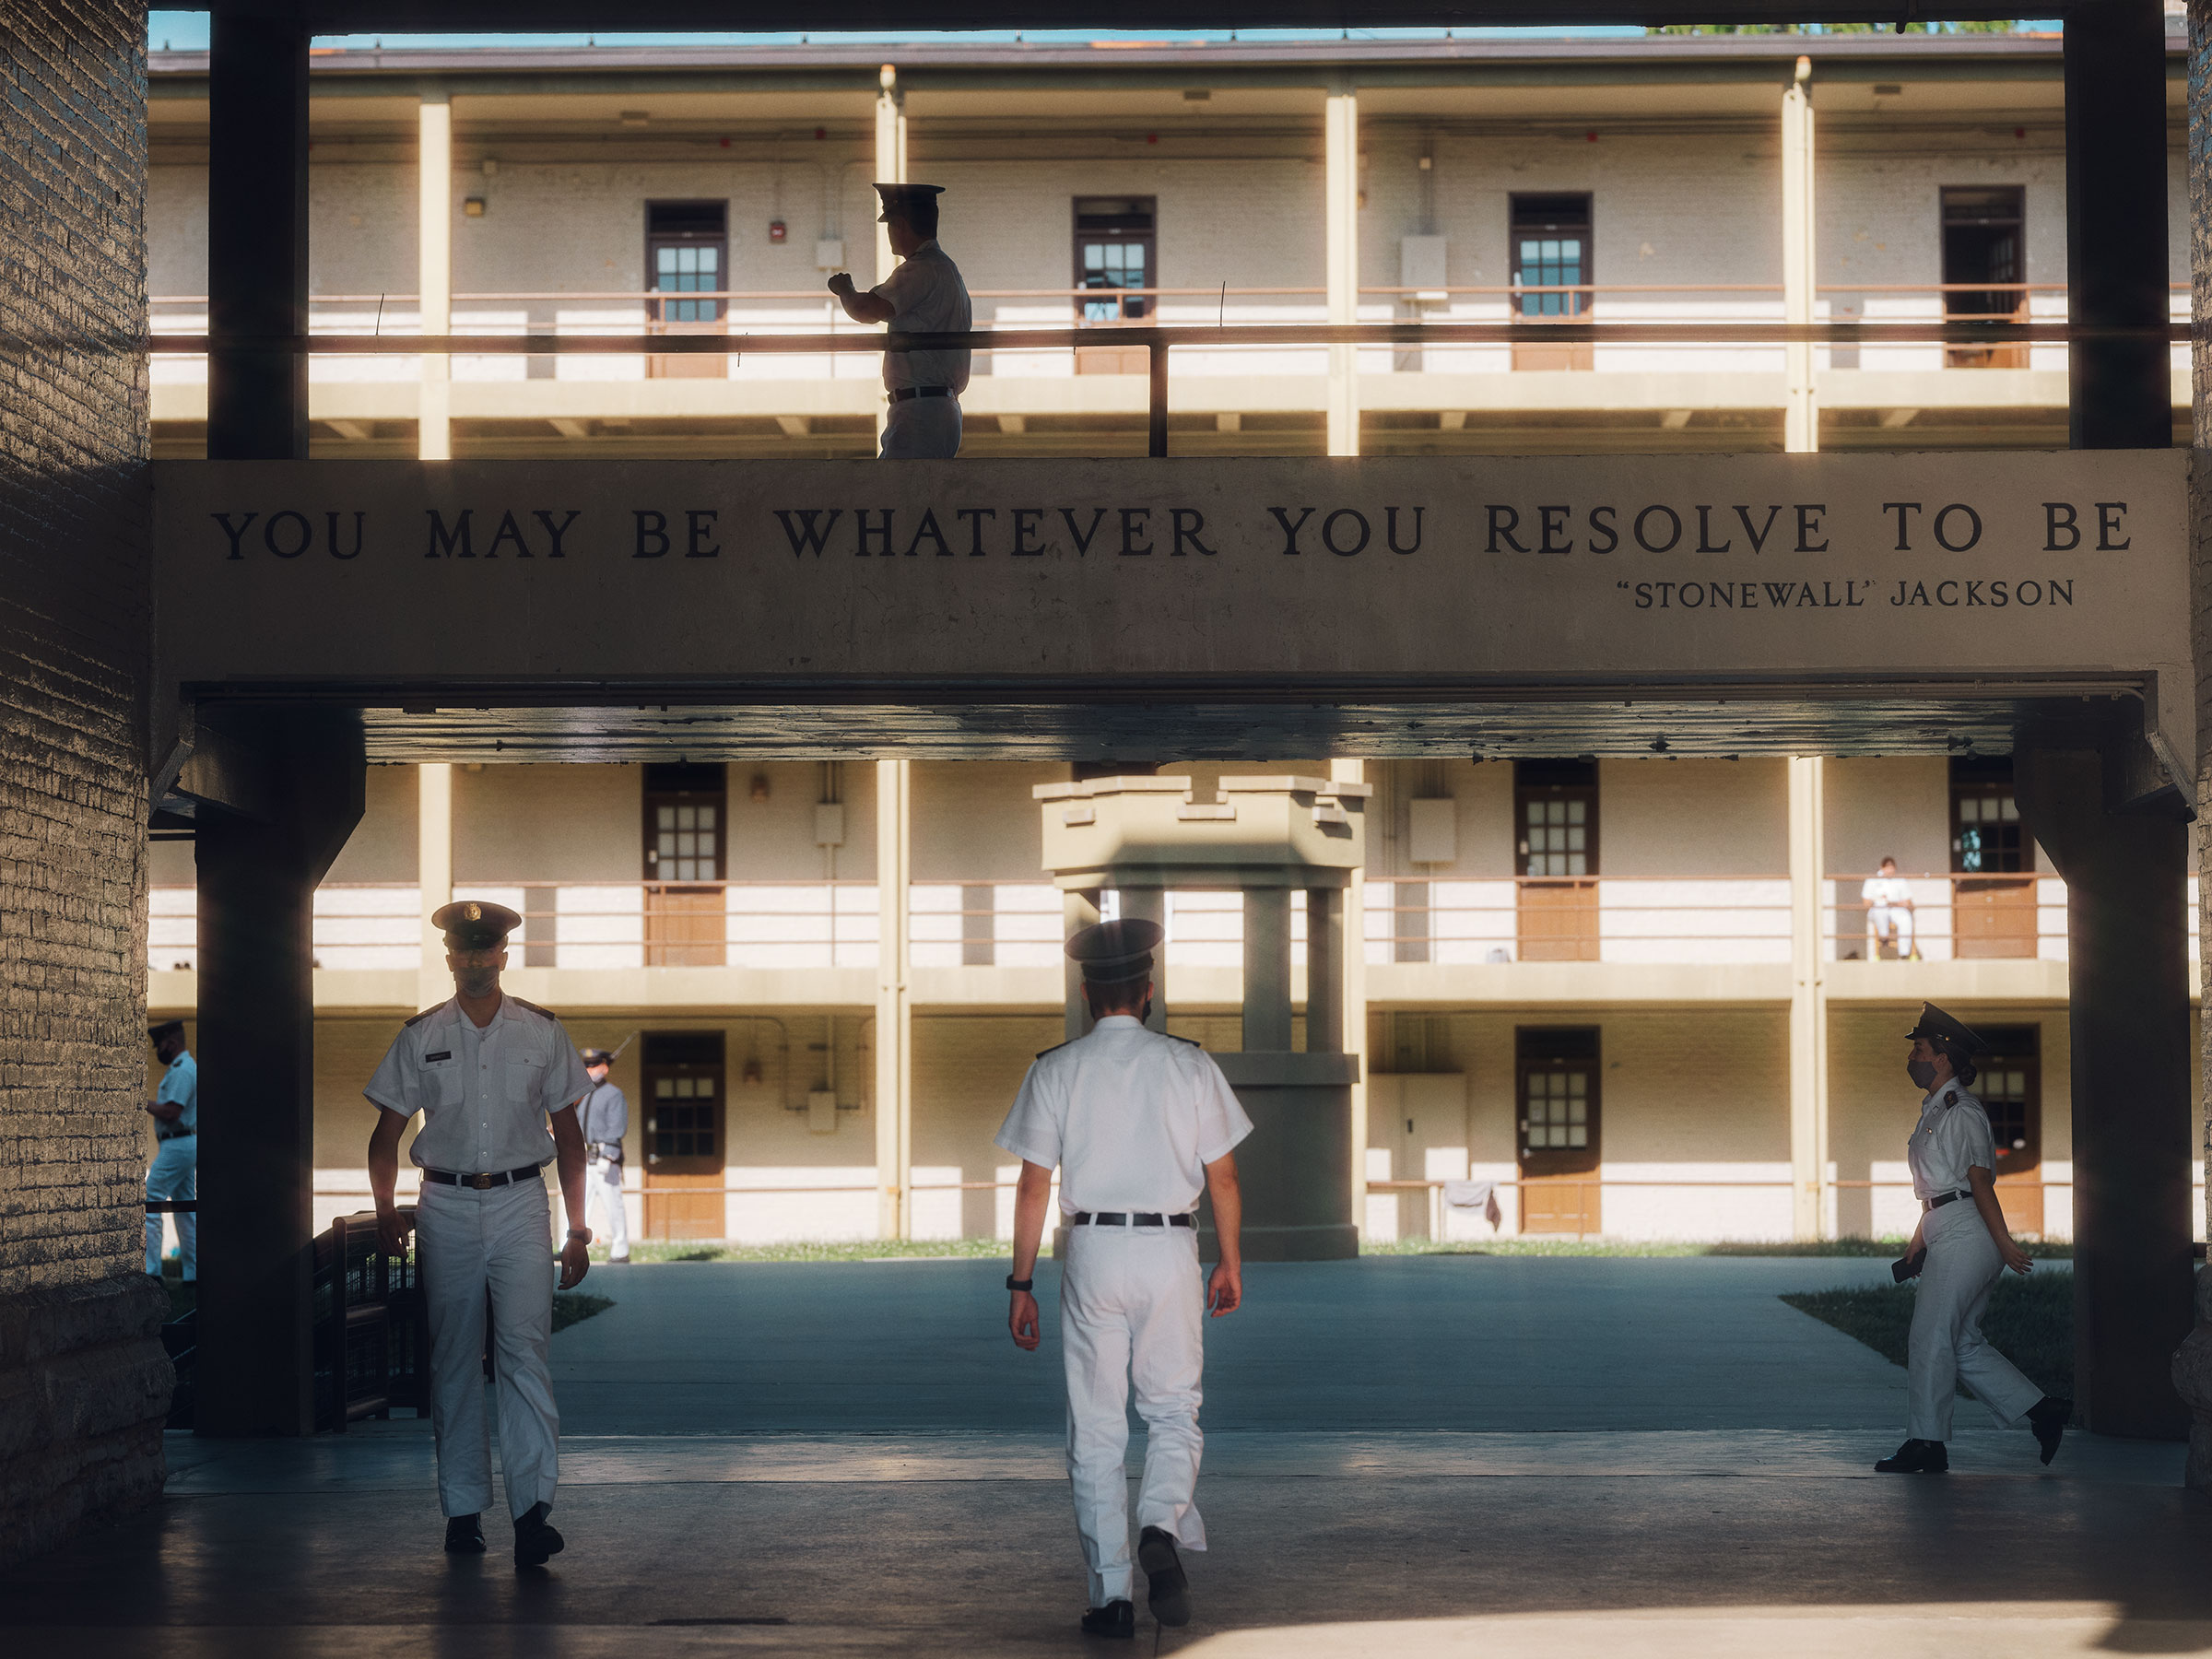 VMI’s board voted in May to strip Jackson’s name from the mantra adorning the barracks. (Jared Soares for TIME)